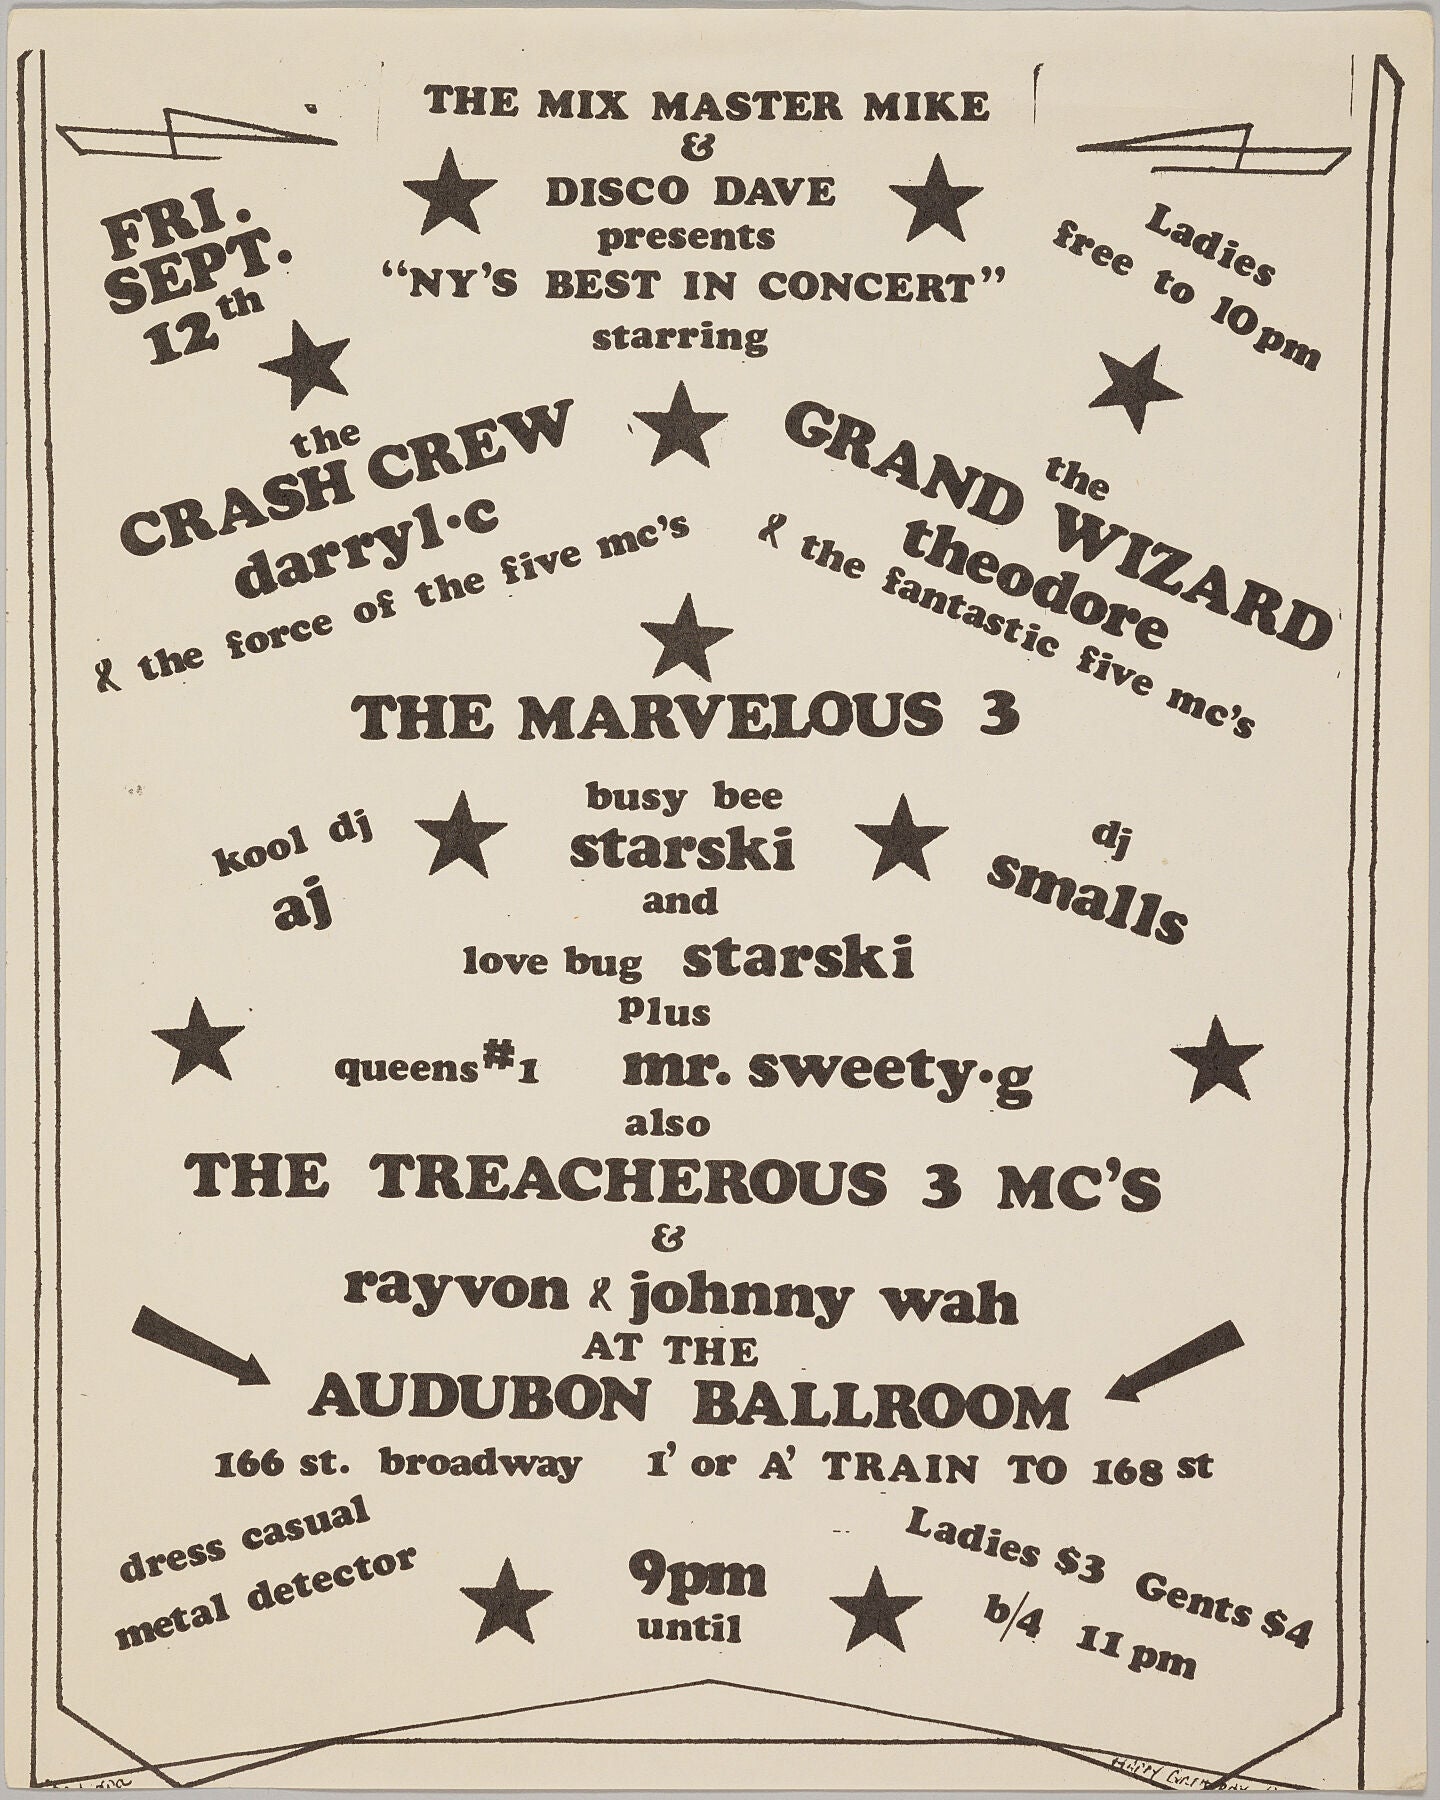 Flier for the “NY’s Best in Concert” presented by Mix Master Mike and Disco Dave September - 1983